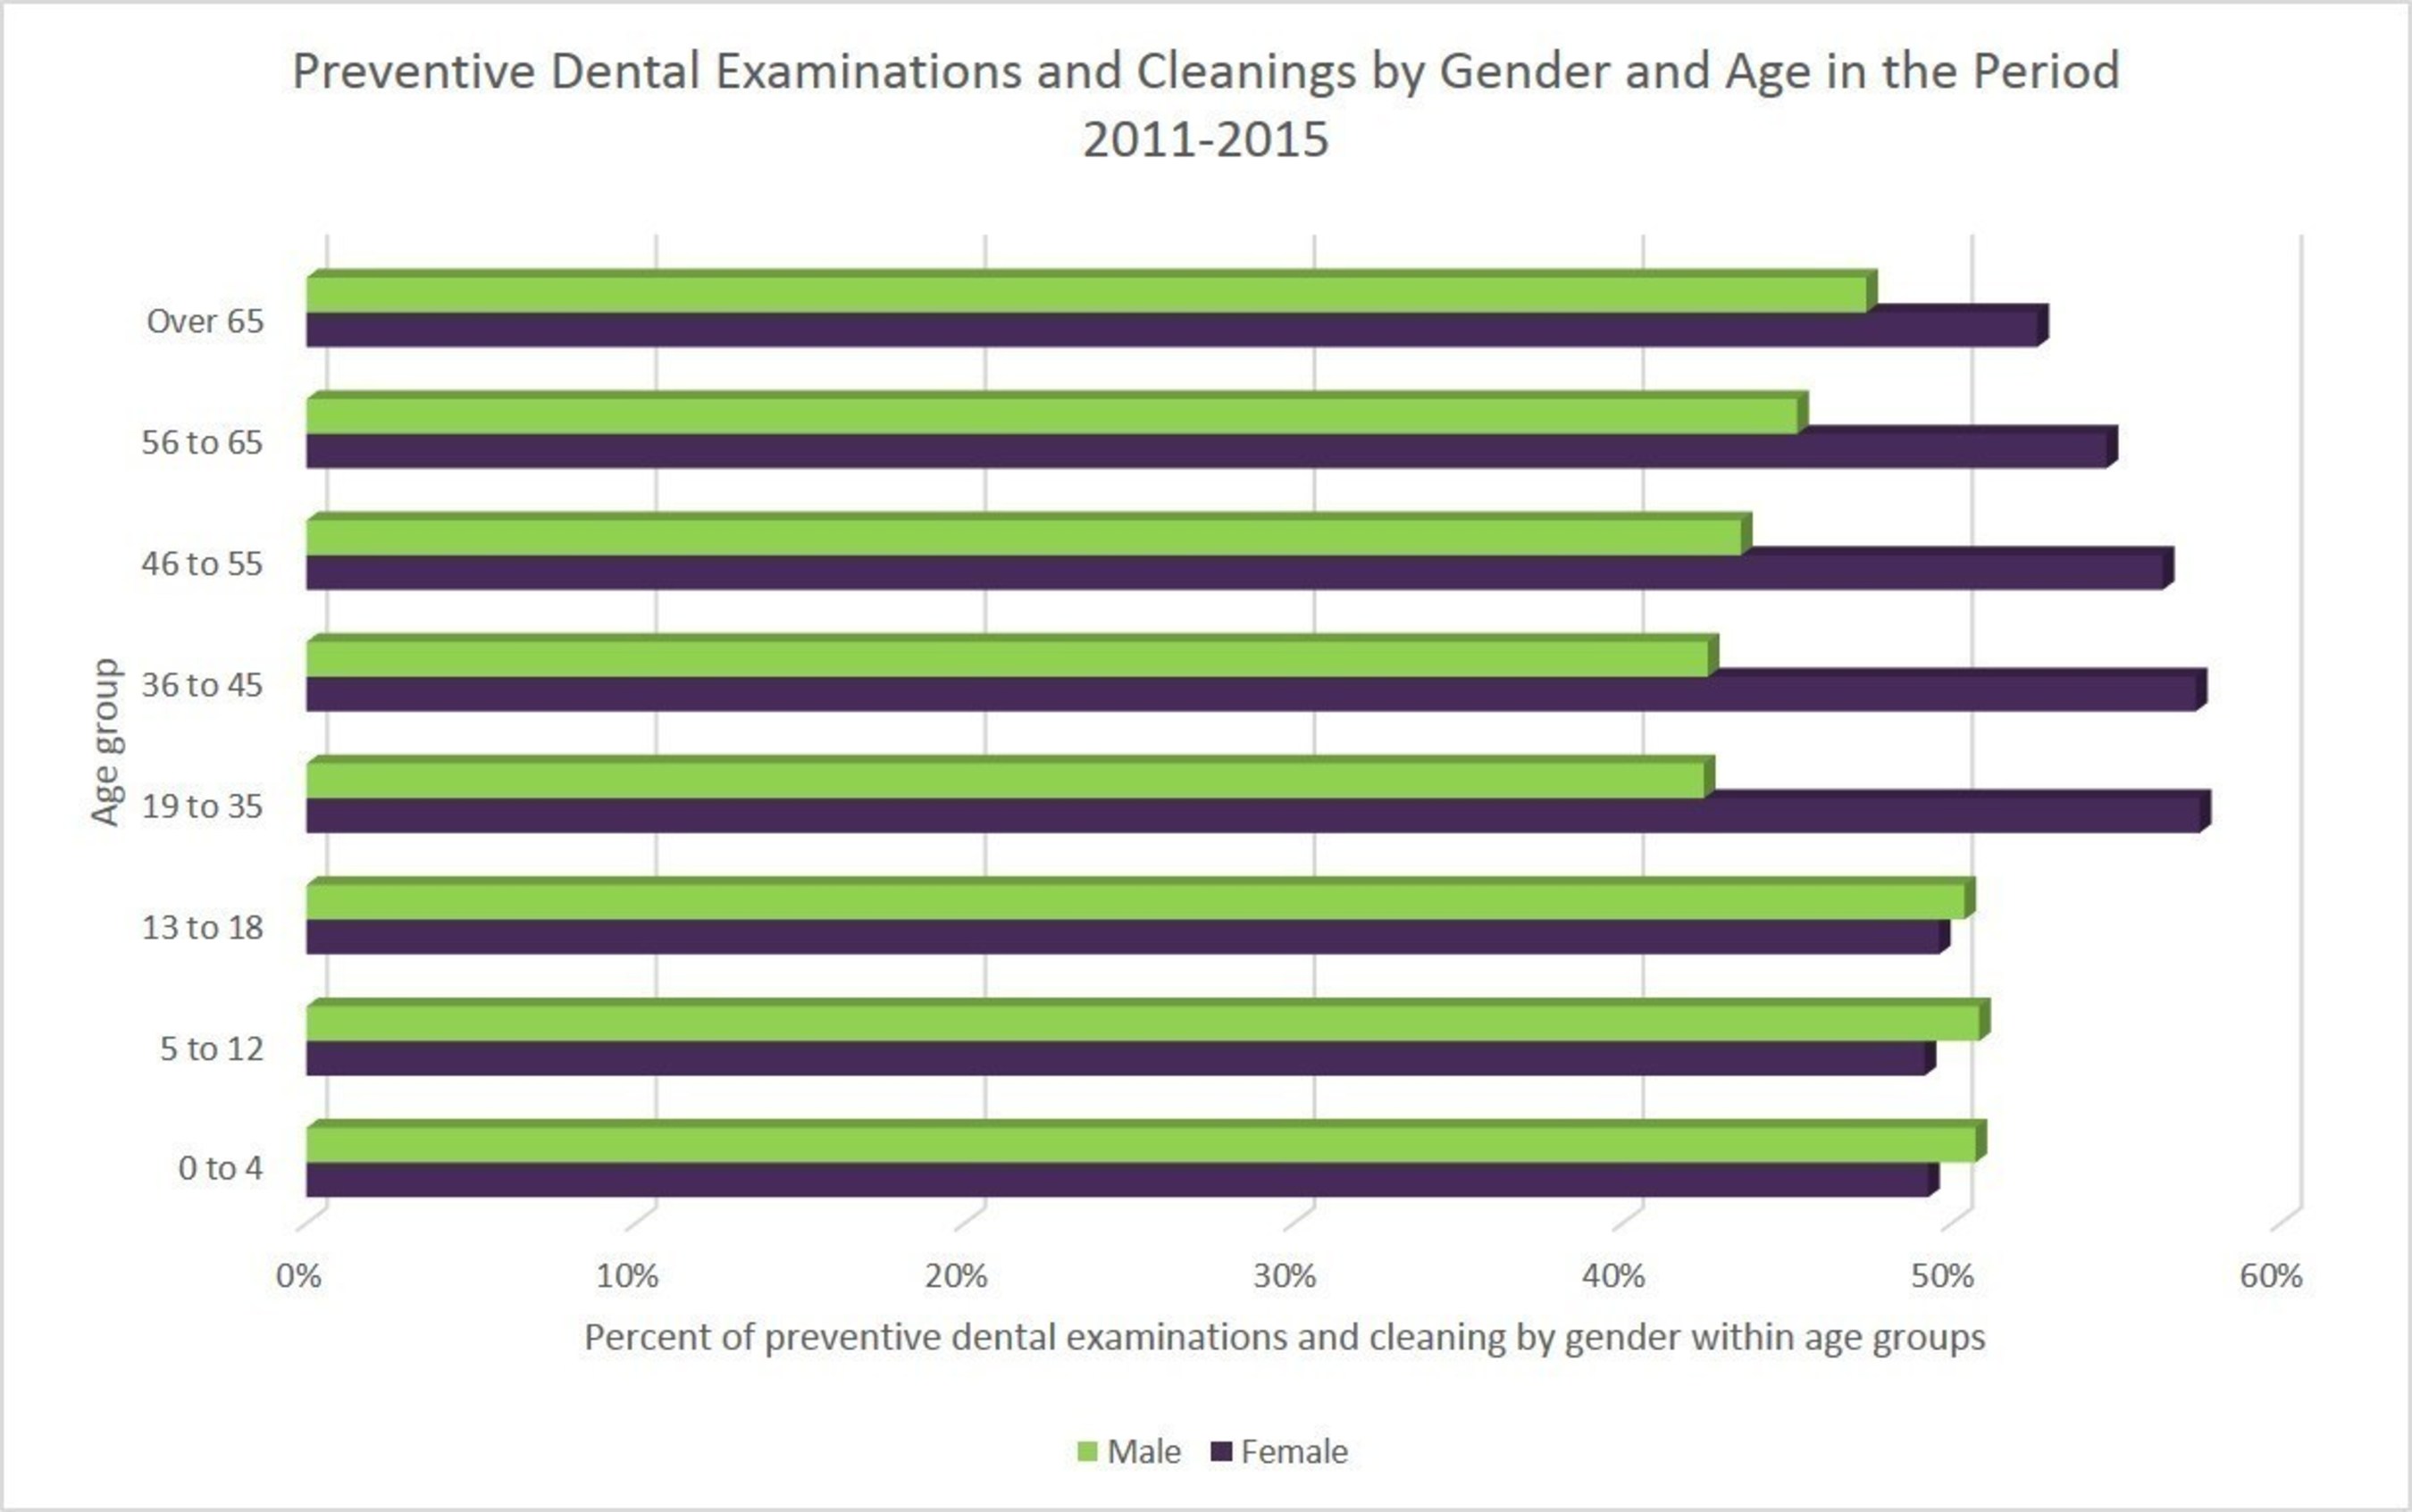 Preventive Dental Examinations and Clearings by Gender and Age in the Period 2011-2015